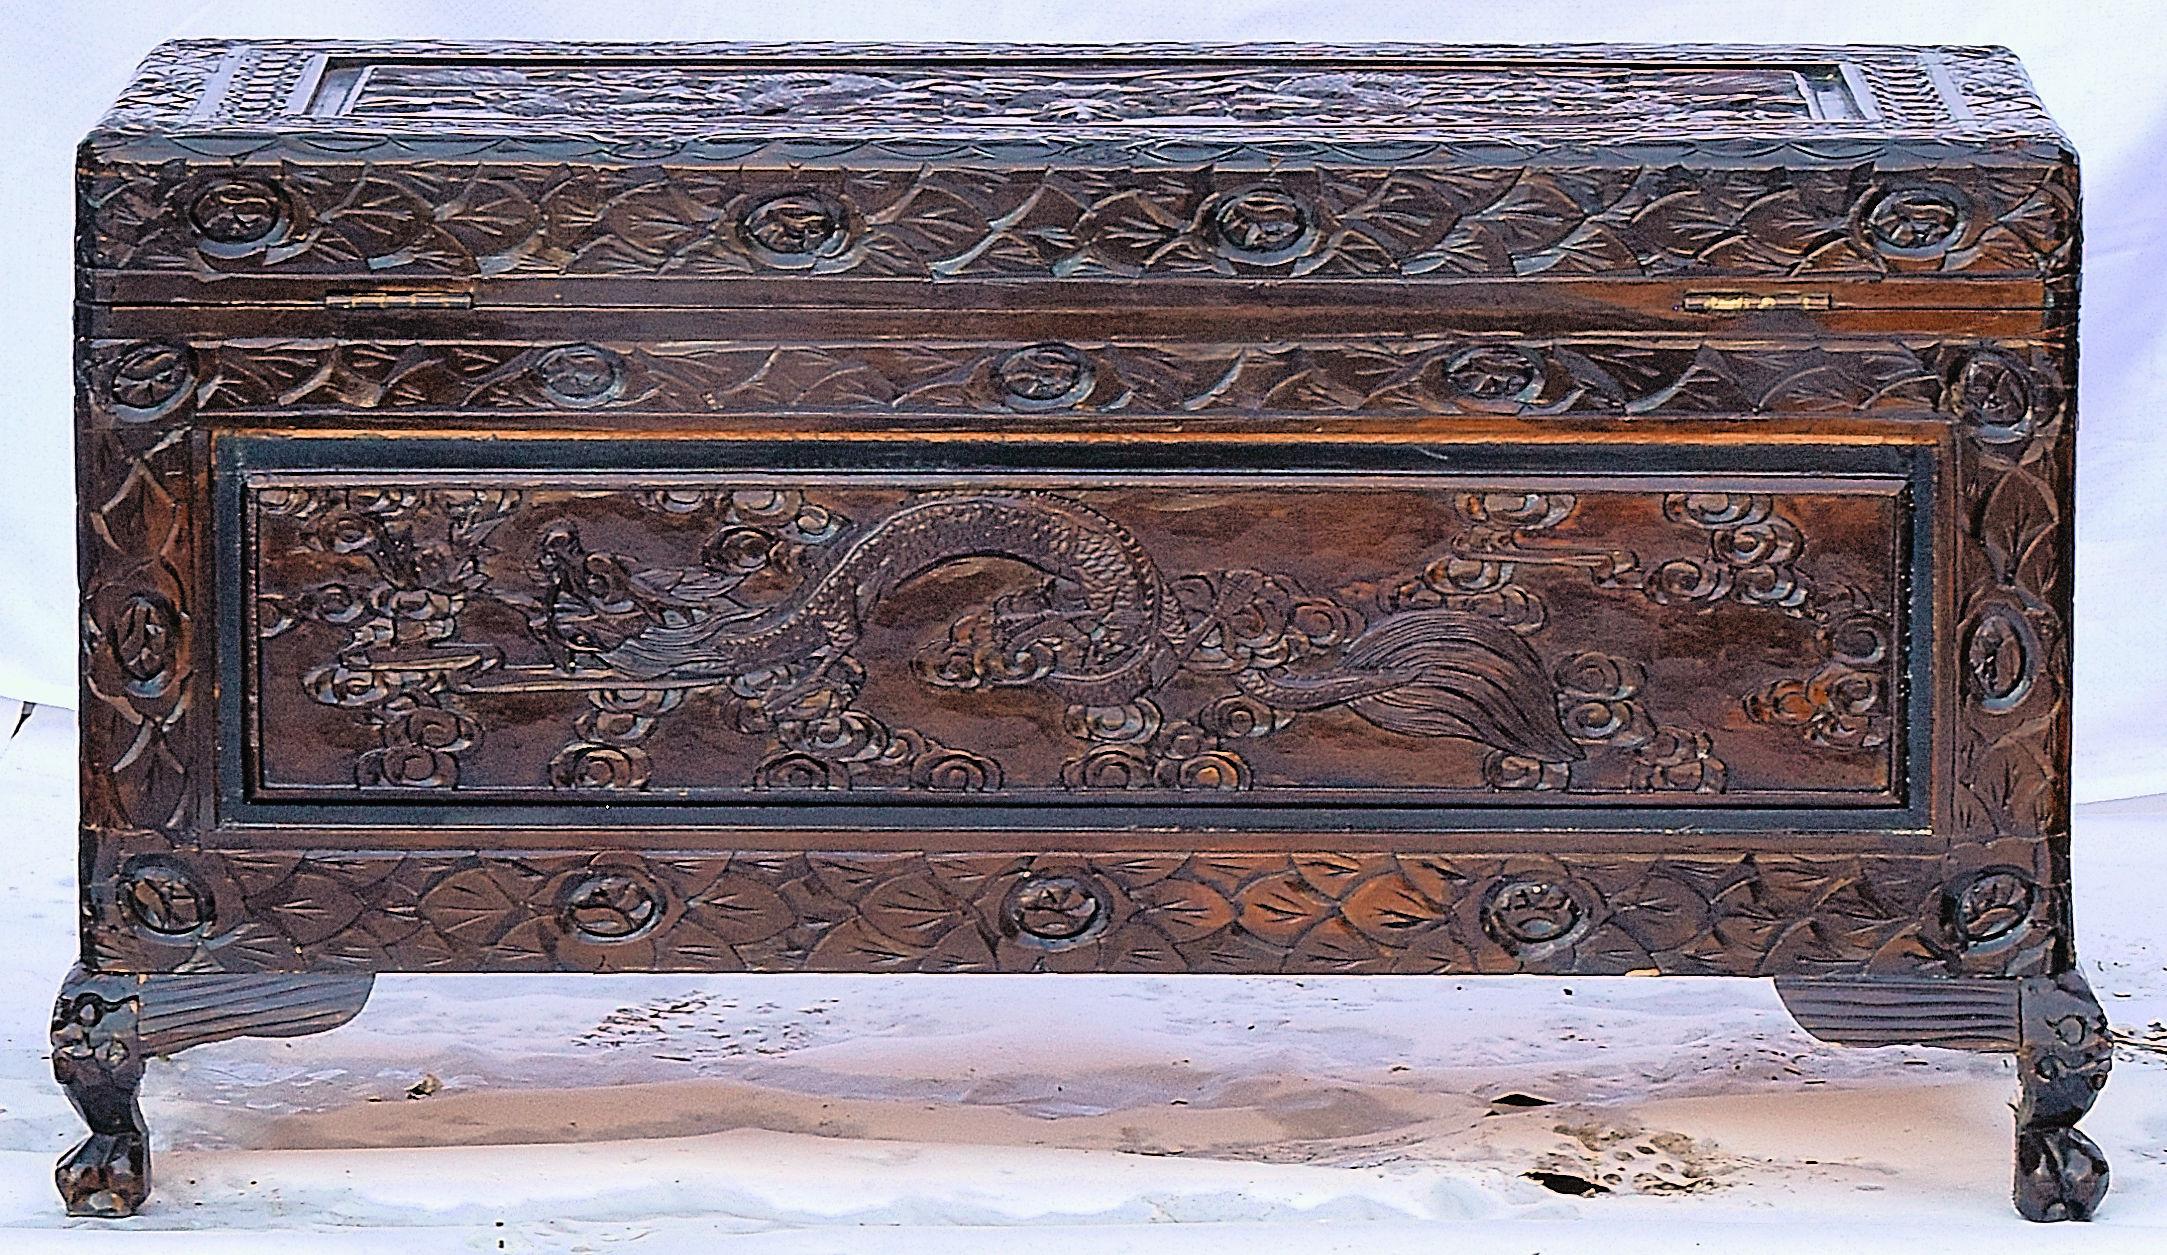 We are delighted to offer for sale this vintage Chinese export carved wood trunk with claw and ball feet with the front of the piece depicting dragon scenes, hand-hammered lock plate that has been engraved, and claw and ball feet.

circa